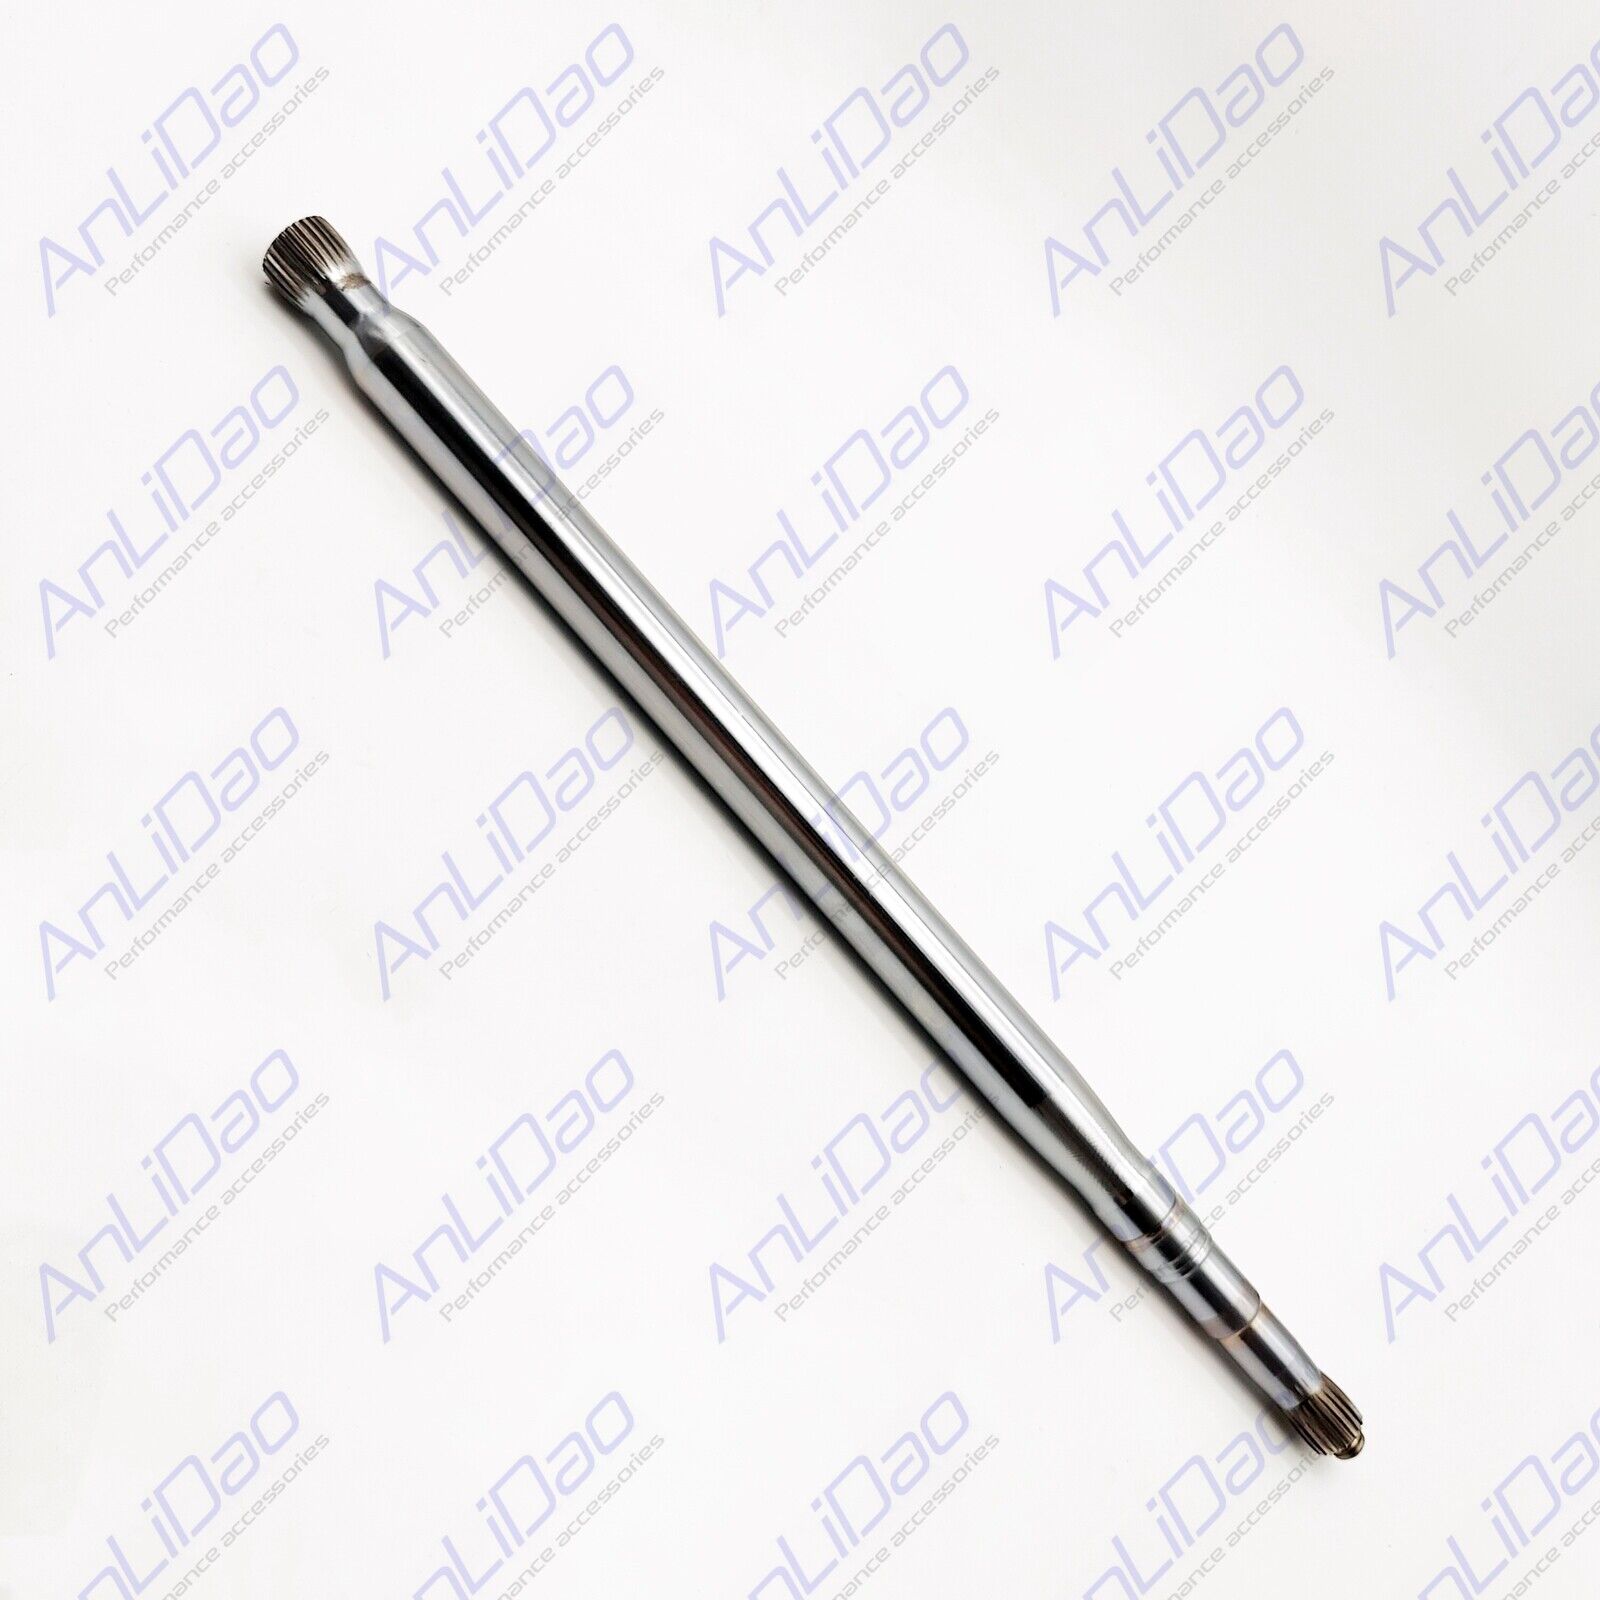 271001719 Fit For Replaces New Sea Doo GTR GTX RXP RXT Drive Shaft Length 590mm